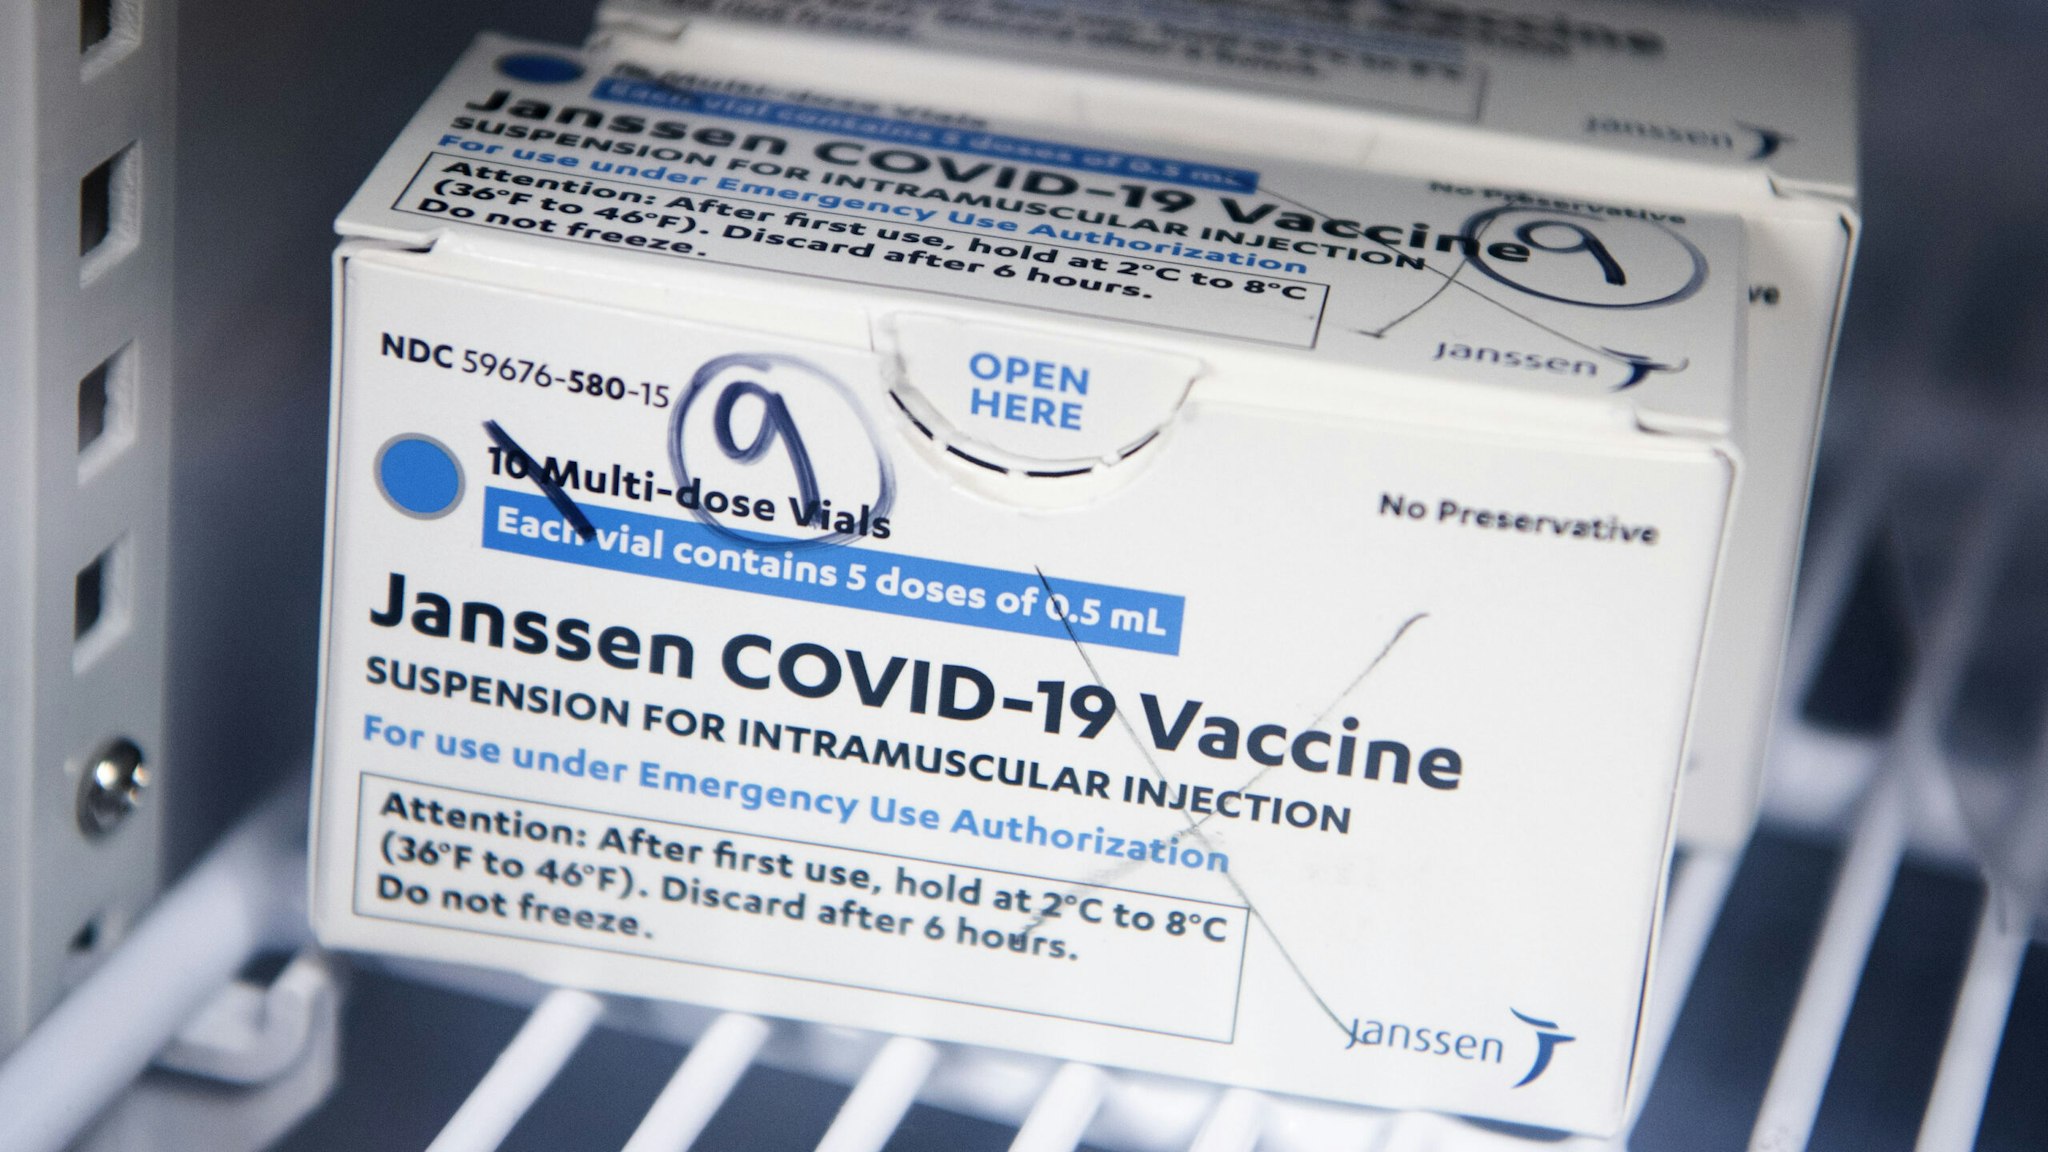 UNITED STATES - APRIL 12: A box of Johnson & Johnson's Janssen COVID-19 vaccine doses are pictured at Grubb's Pharmacy on Capitol Hill on Monday, April 12, 2021.